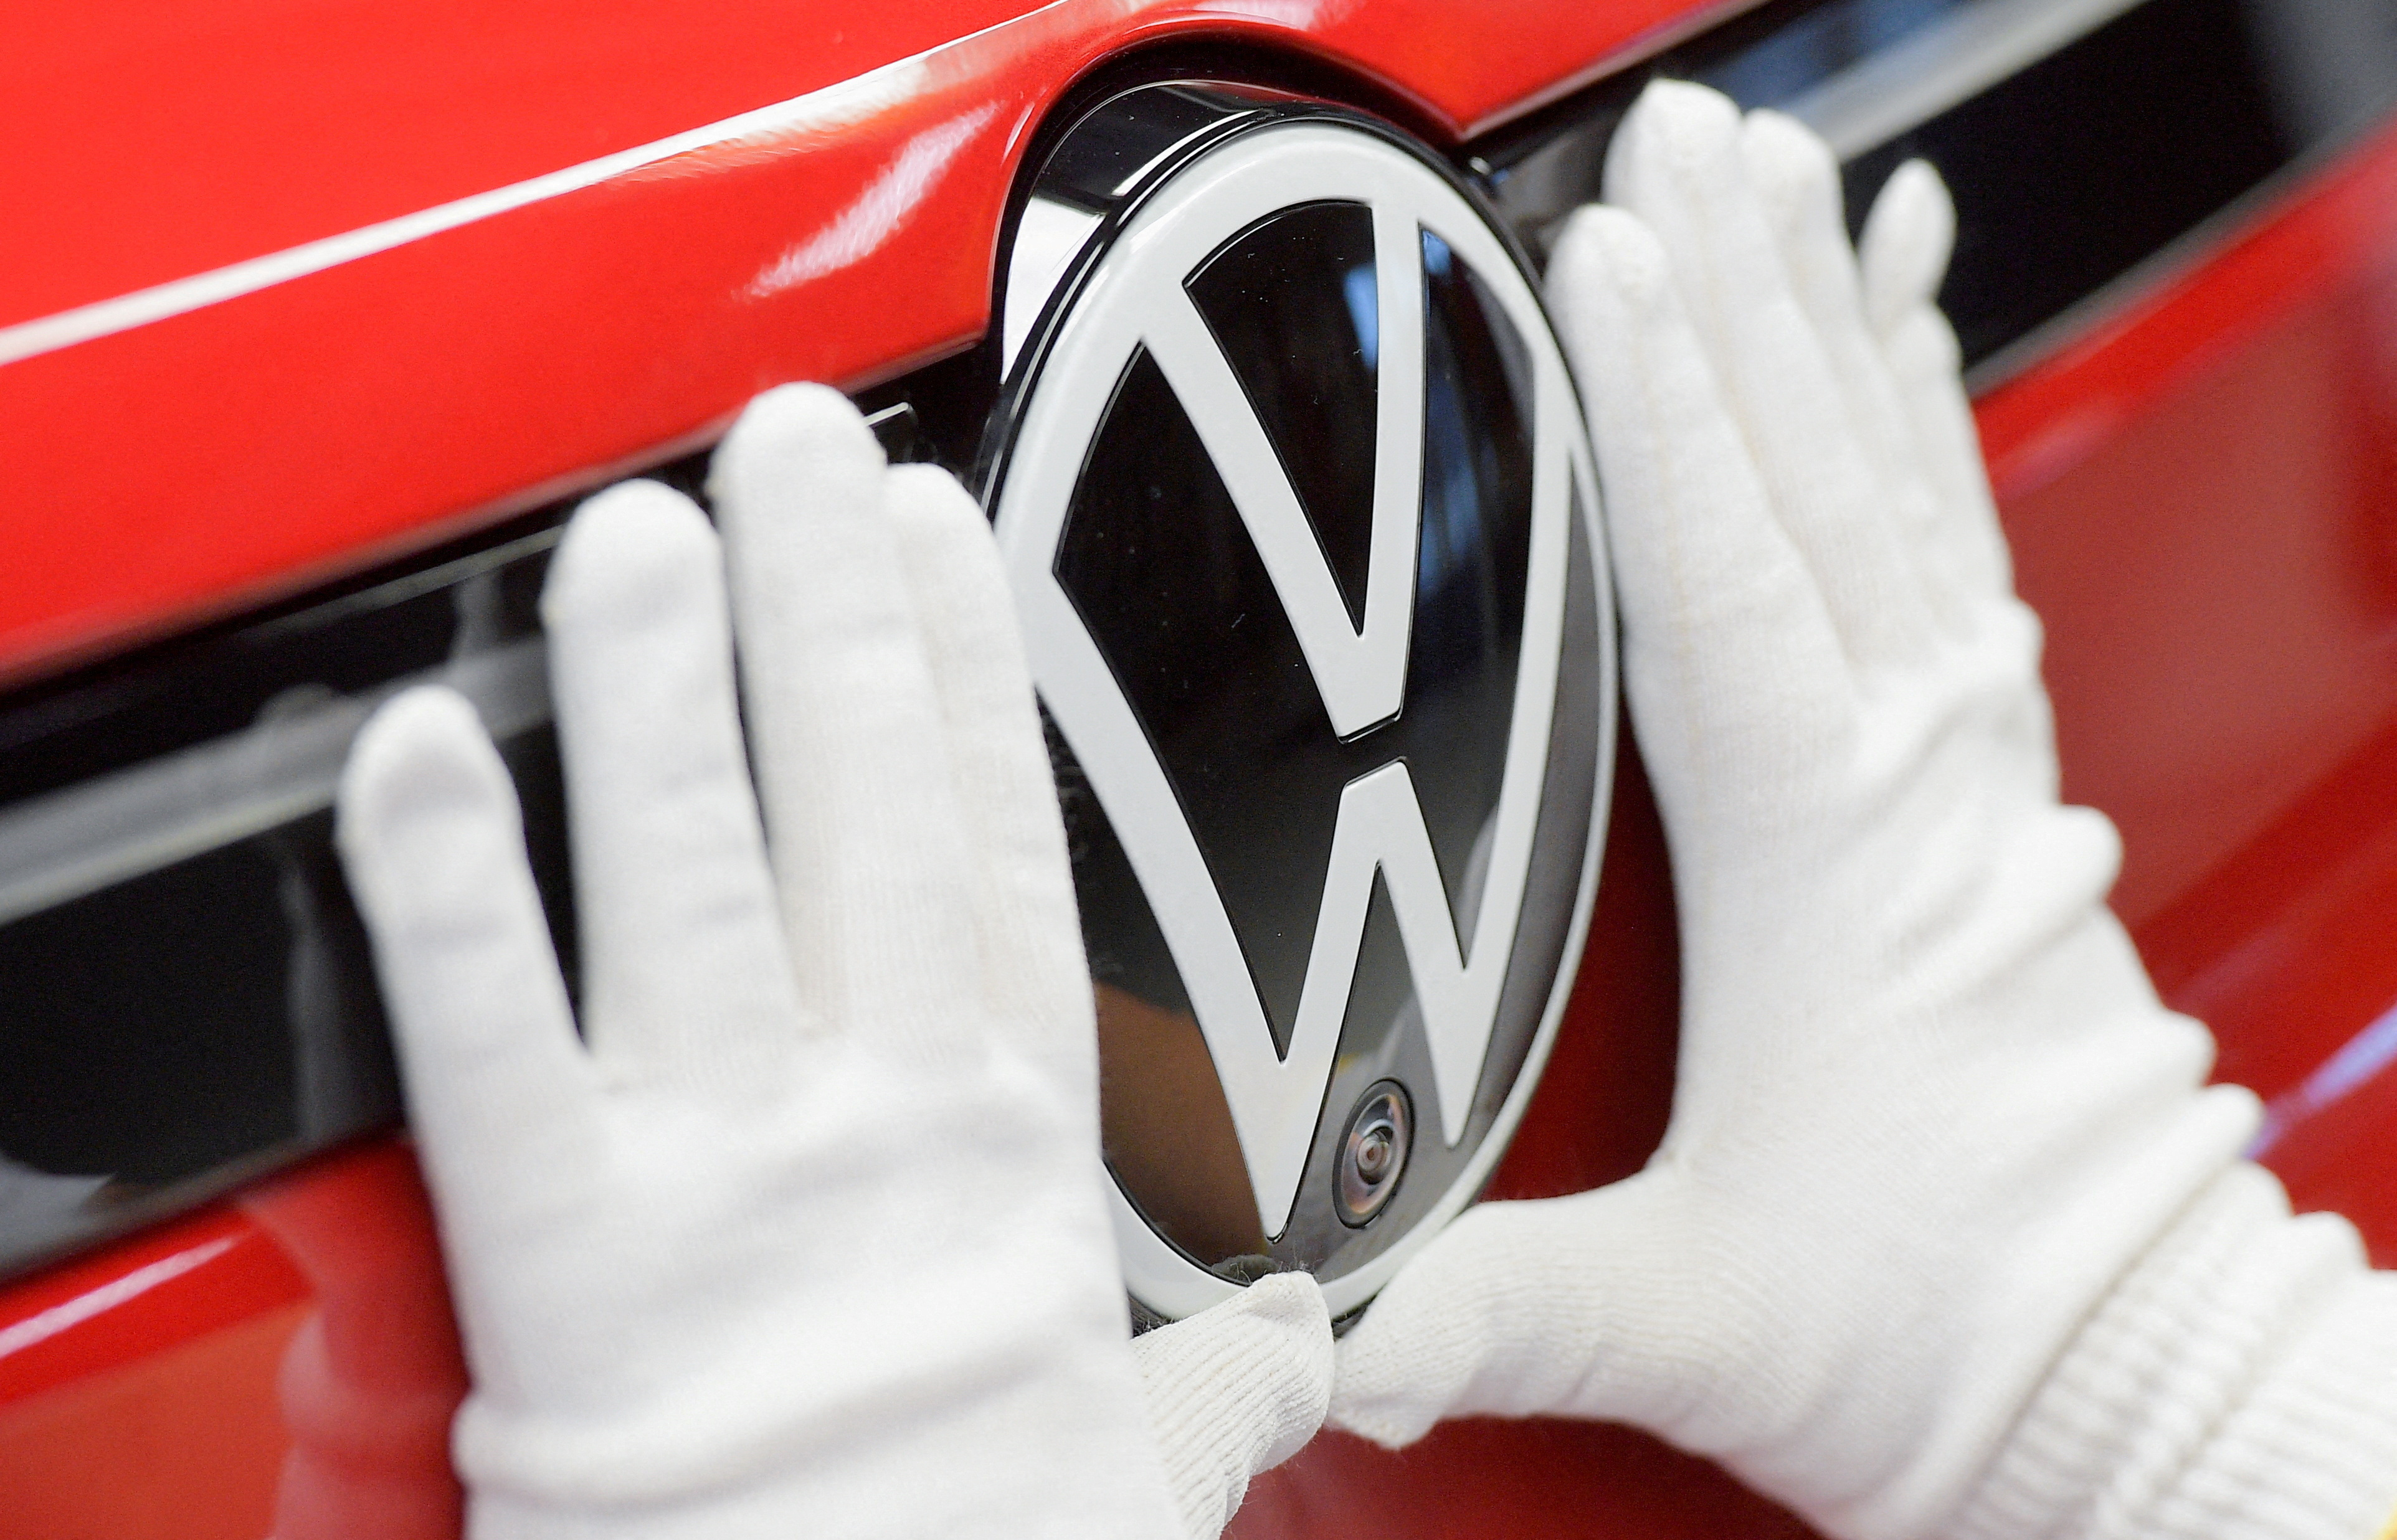 A technician attaches a Volkswagen logo to a car, at the production line for electric car models of the Volkswagen Group, in Zwickau